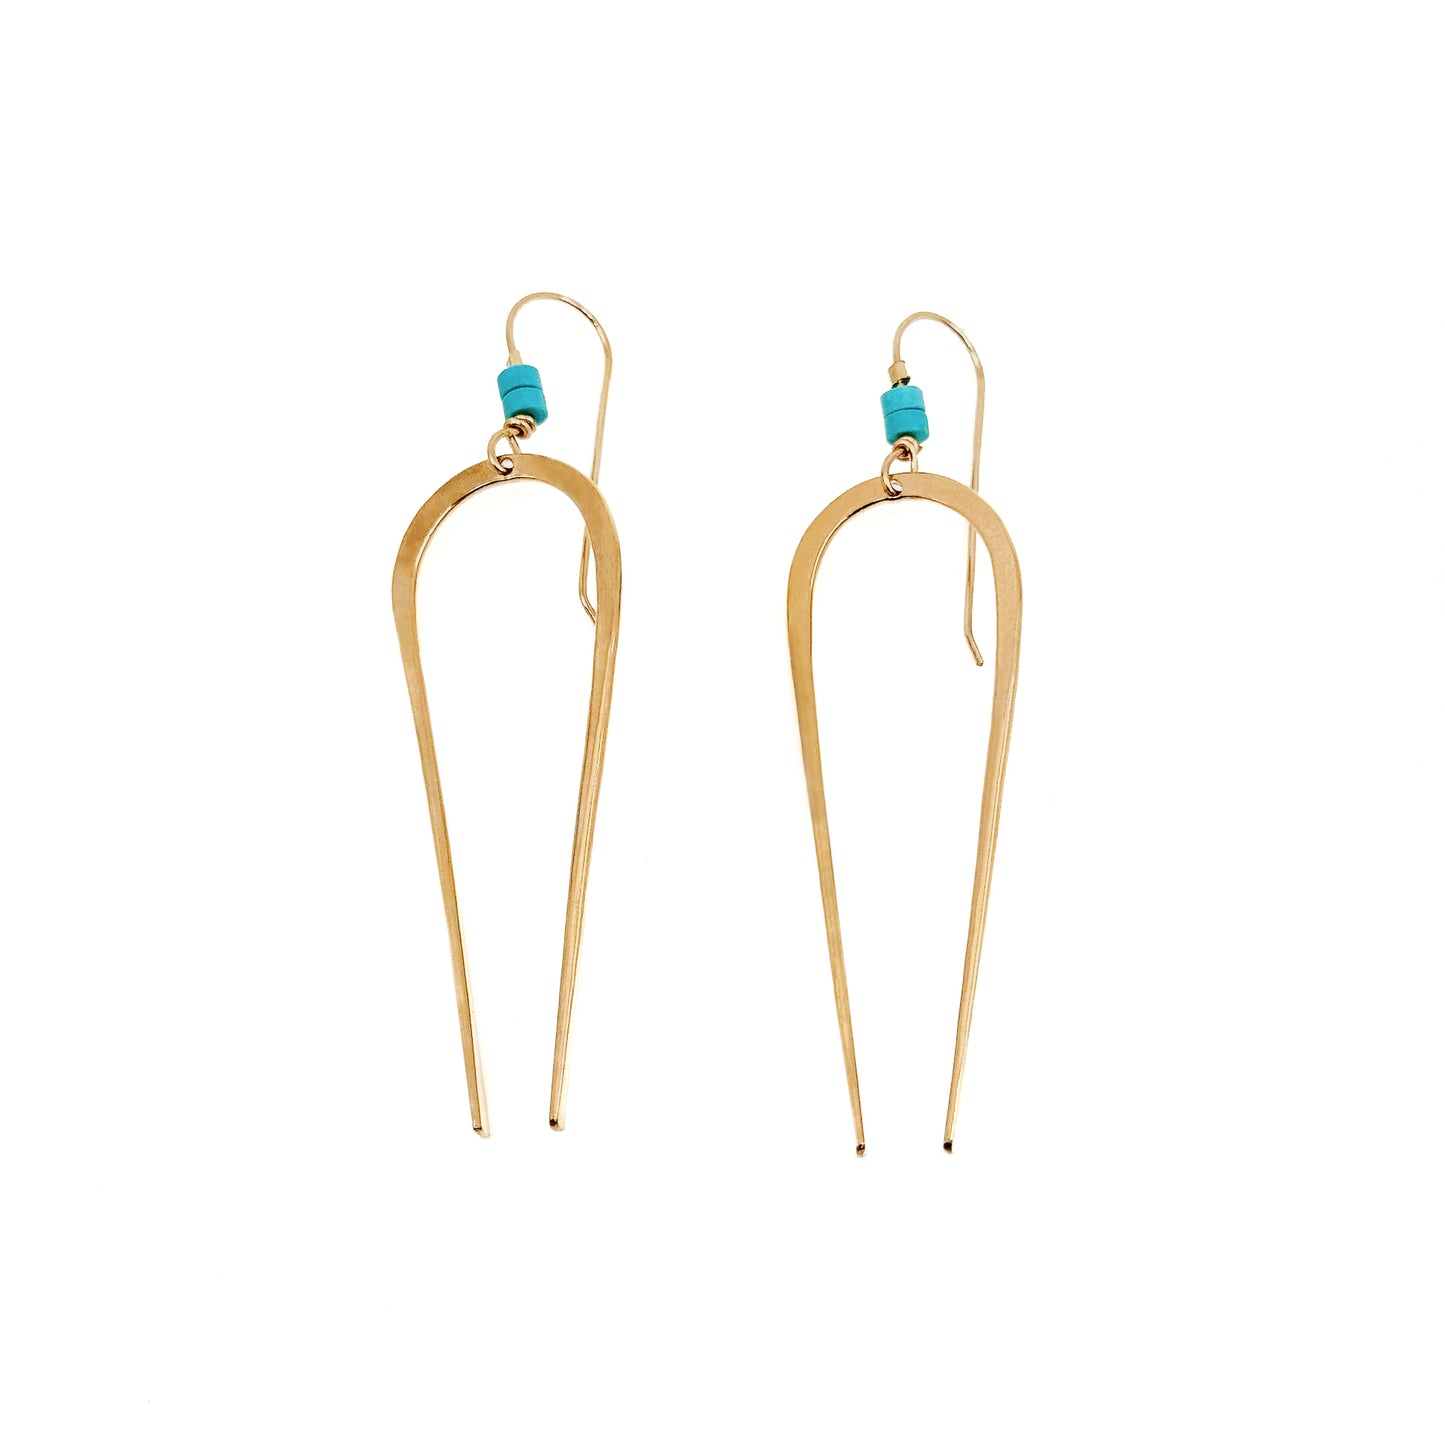 Skinny Squash Blossom Earrings with Turquoise